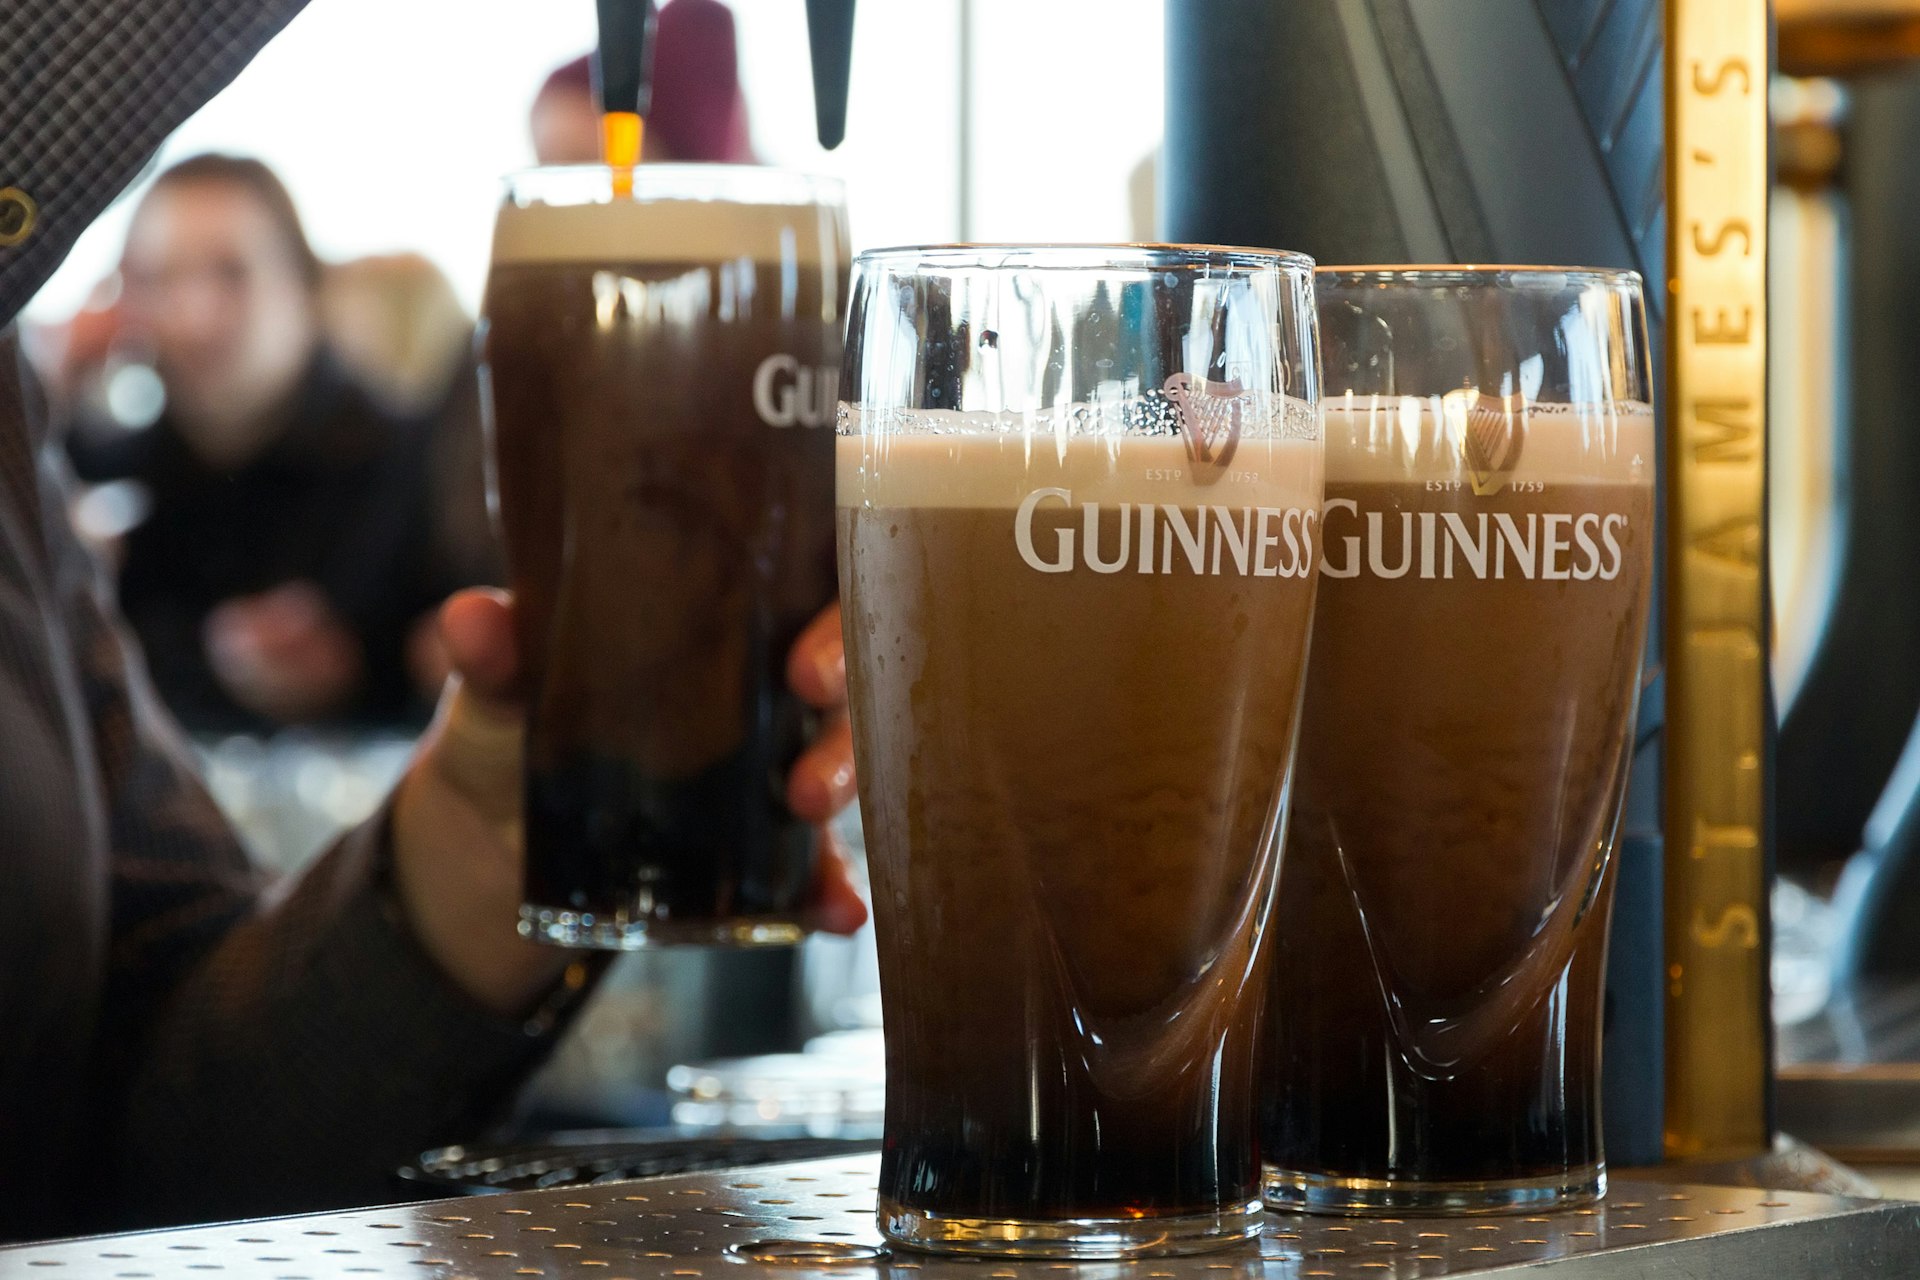 Two pints of Guinness, a distinctive dark beer with a white top, stand on a bar as another is being poured straight from the pump